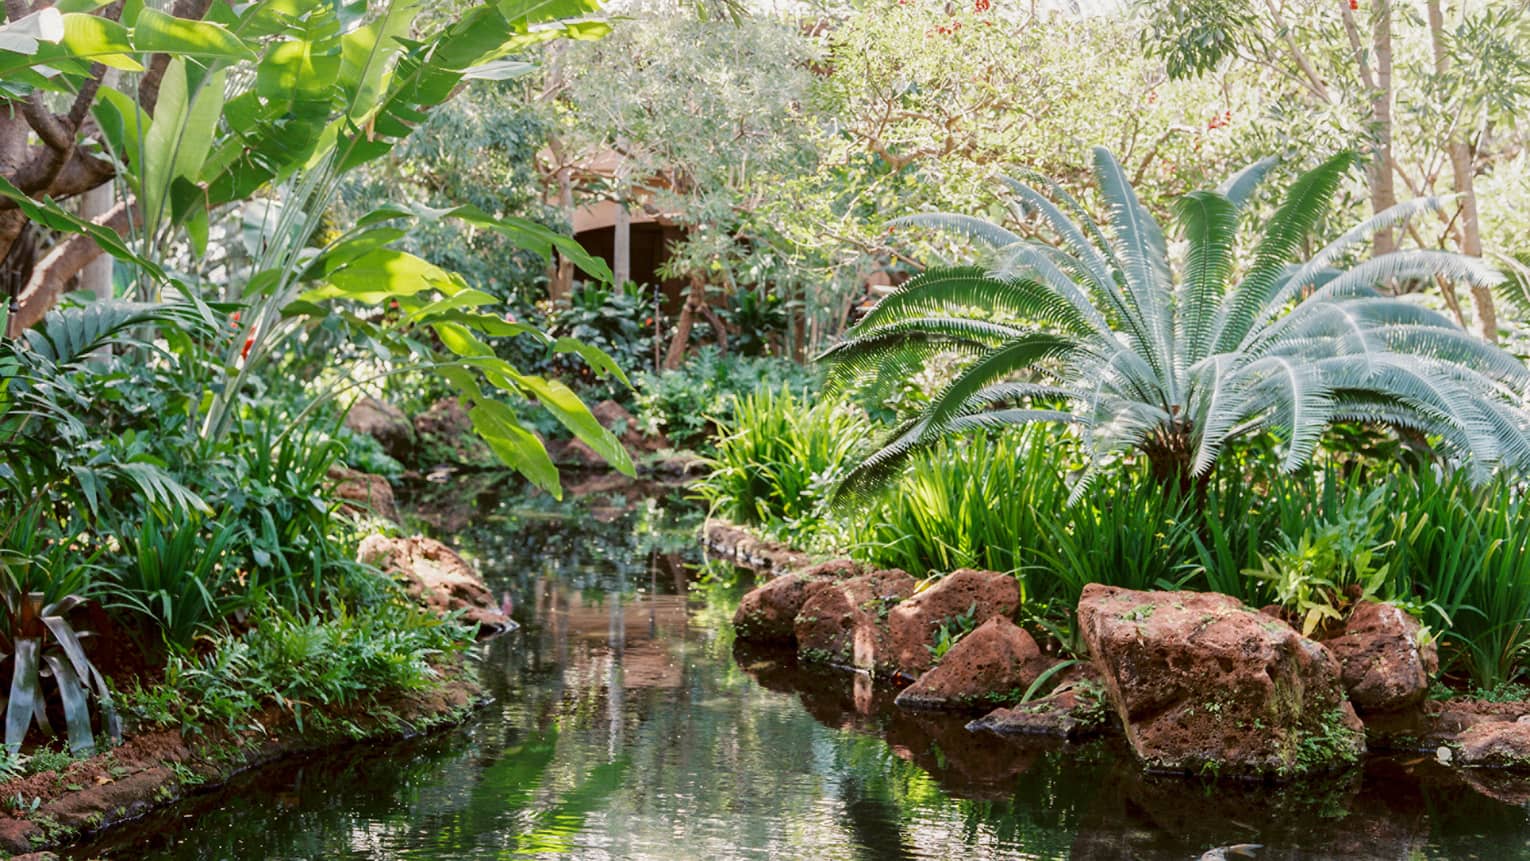 Tropical plants and rocks over garden pond